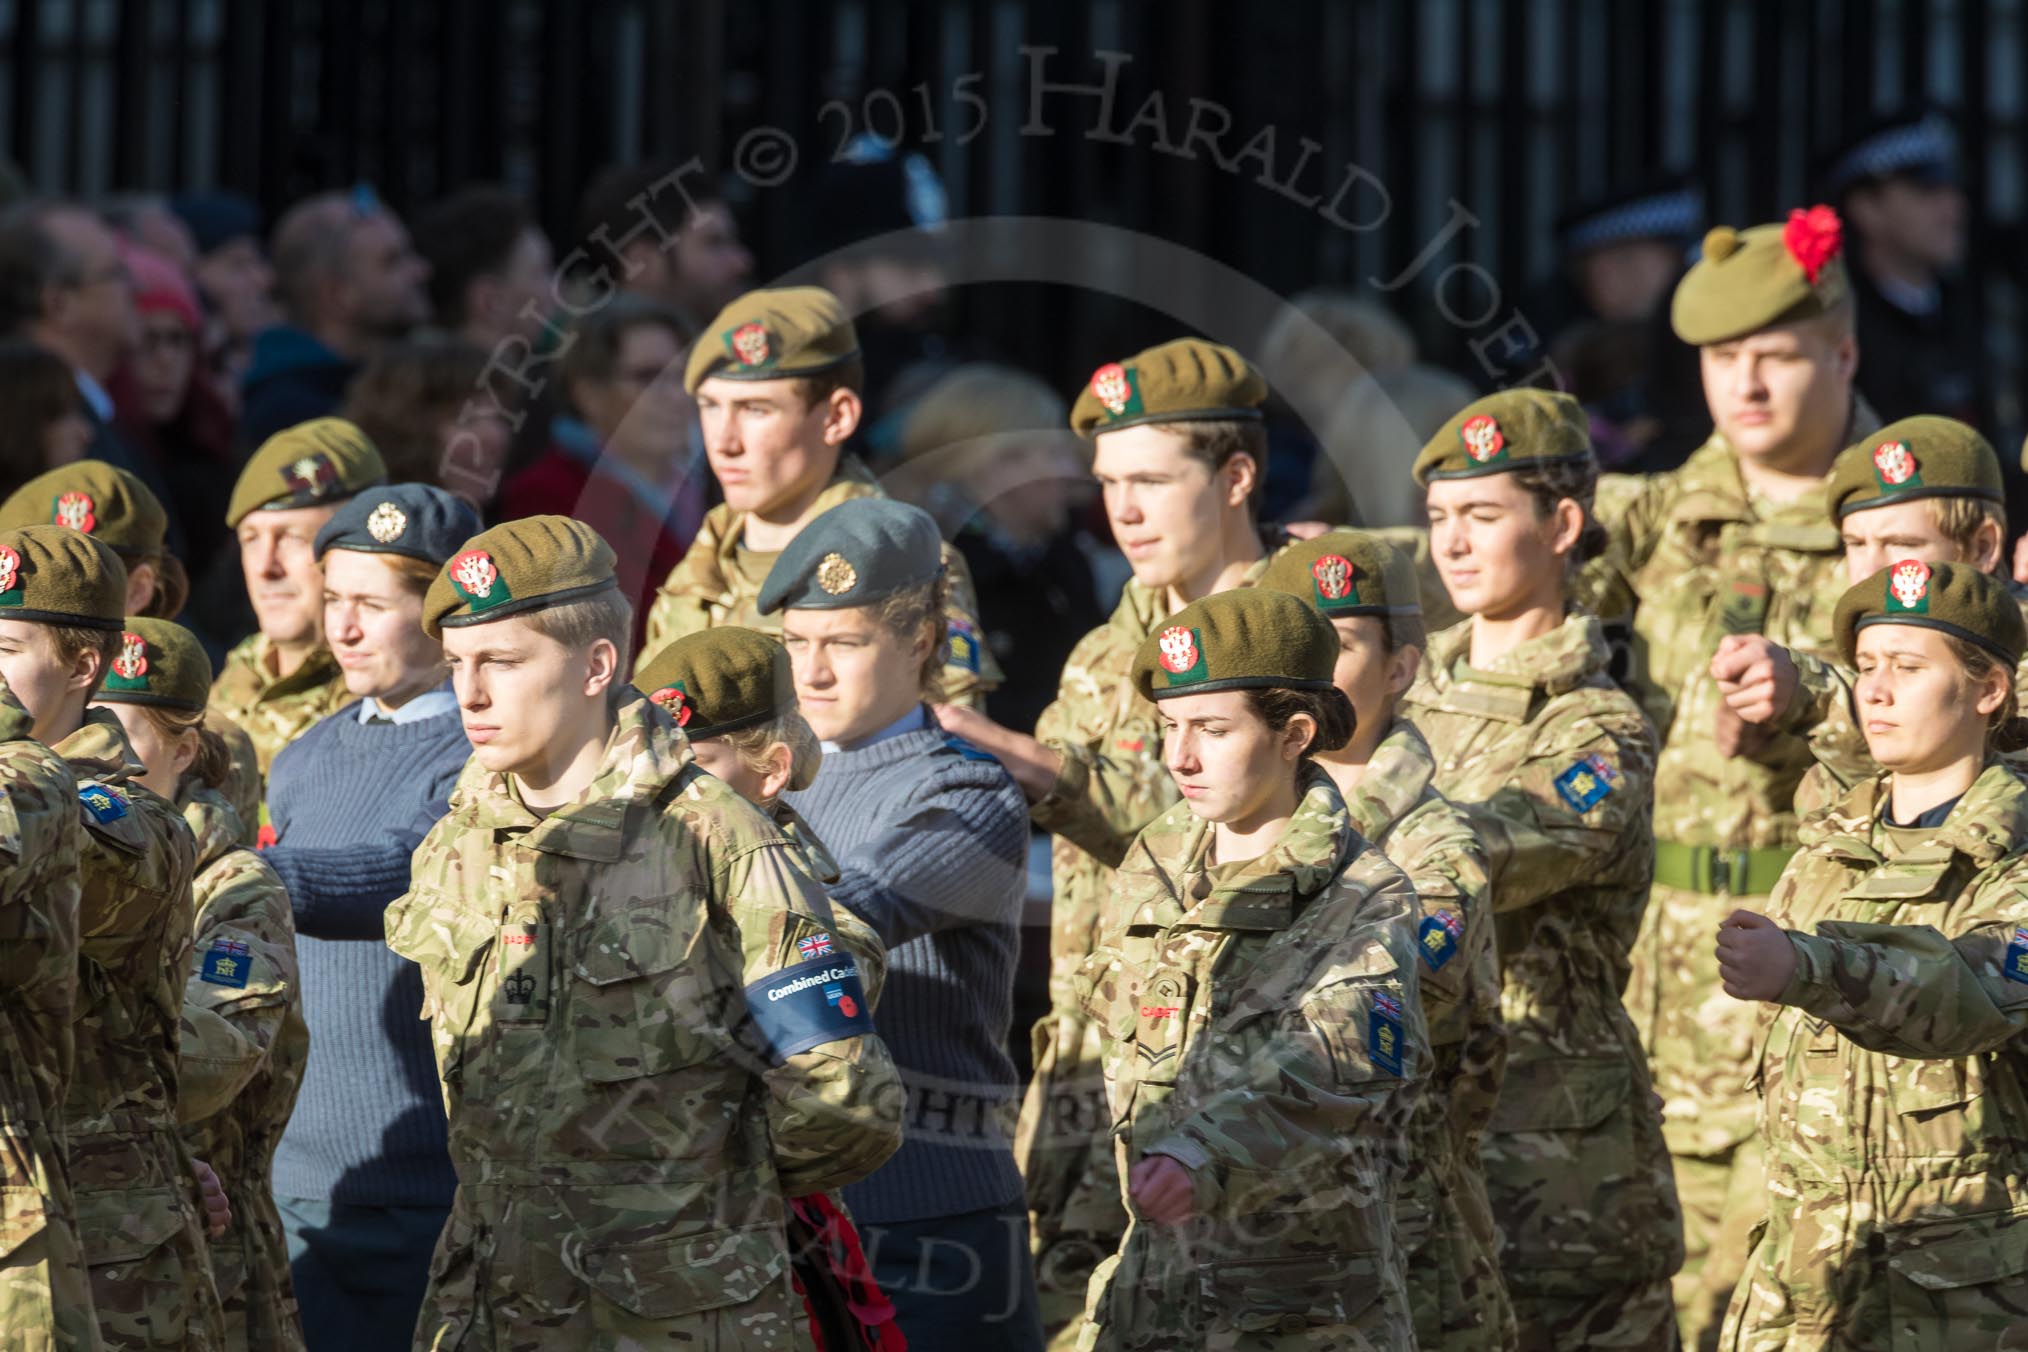 March Past, Remembrance Sunday at the Cenotaph 2016: M32 Army and combined Cadet Force.
Cenotaph, Whitehall, London SW1,
London,
Greater London,
United Kingdom,
on 13 November 2016 at 13:18, image #2804